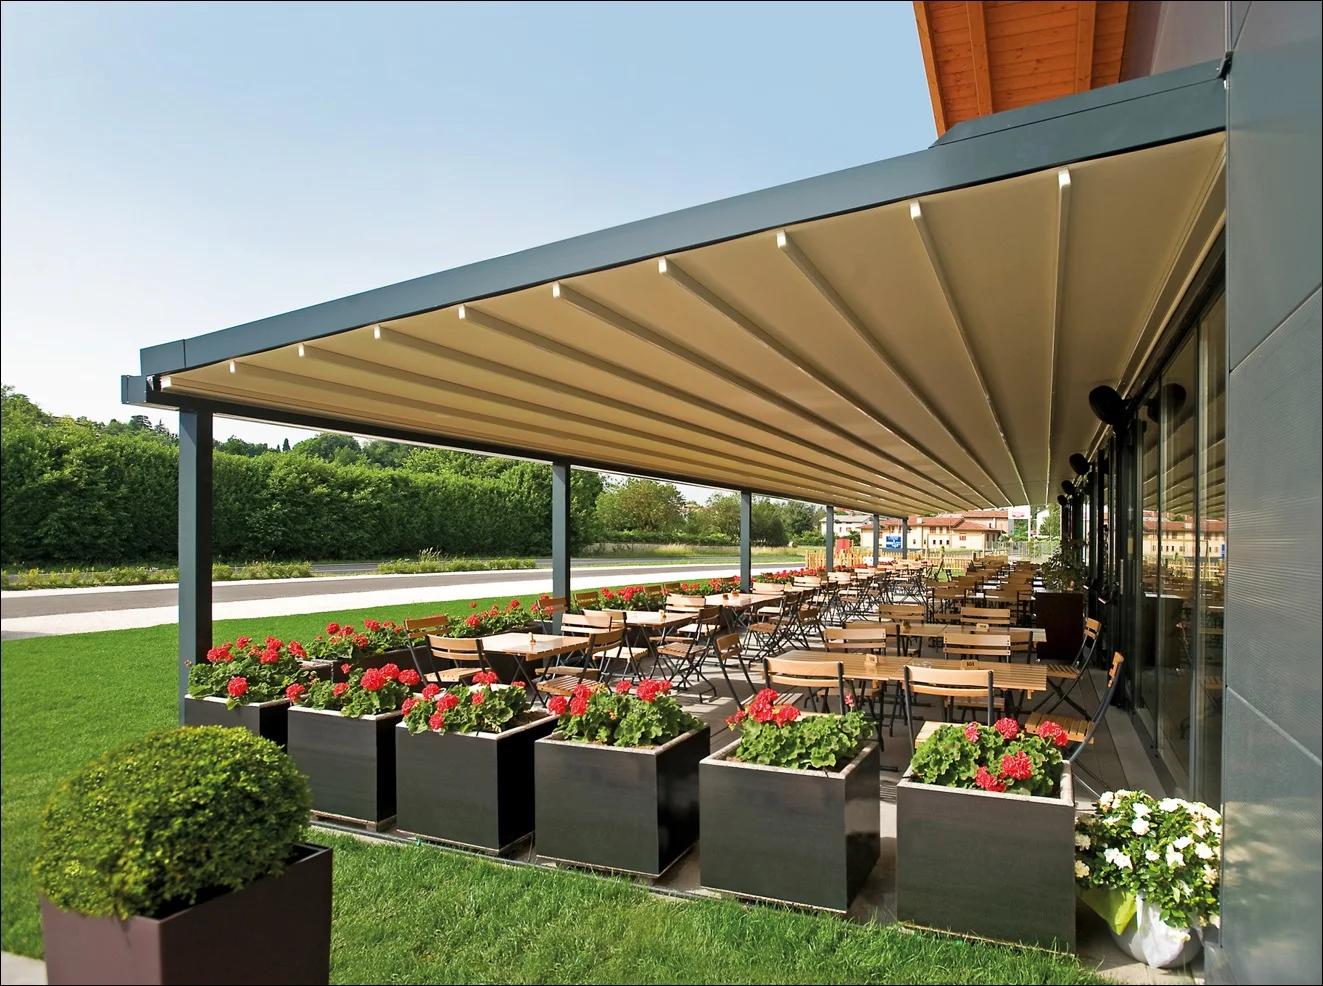 commercial retractable awning over a seating area